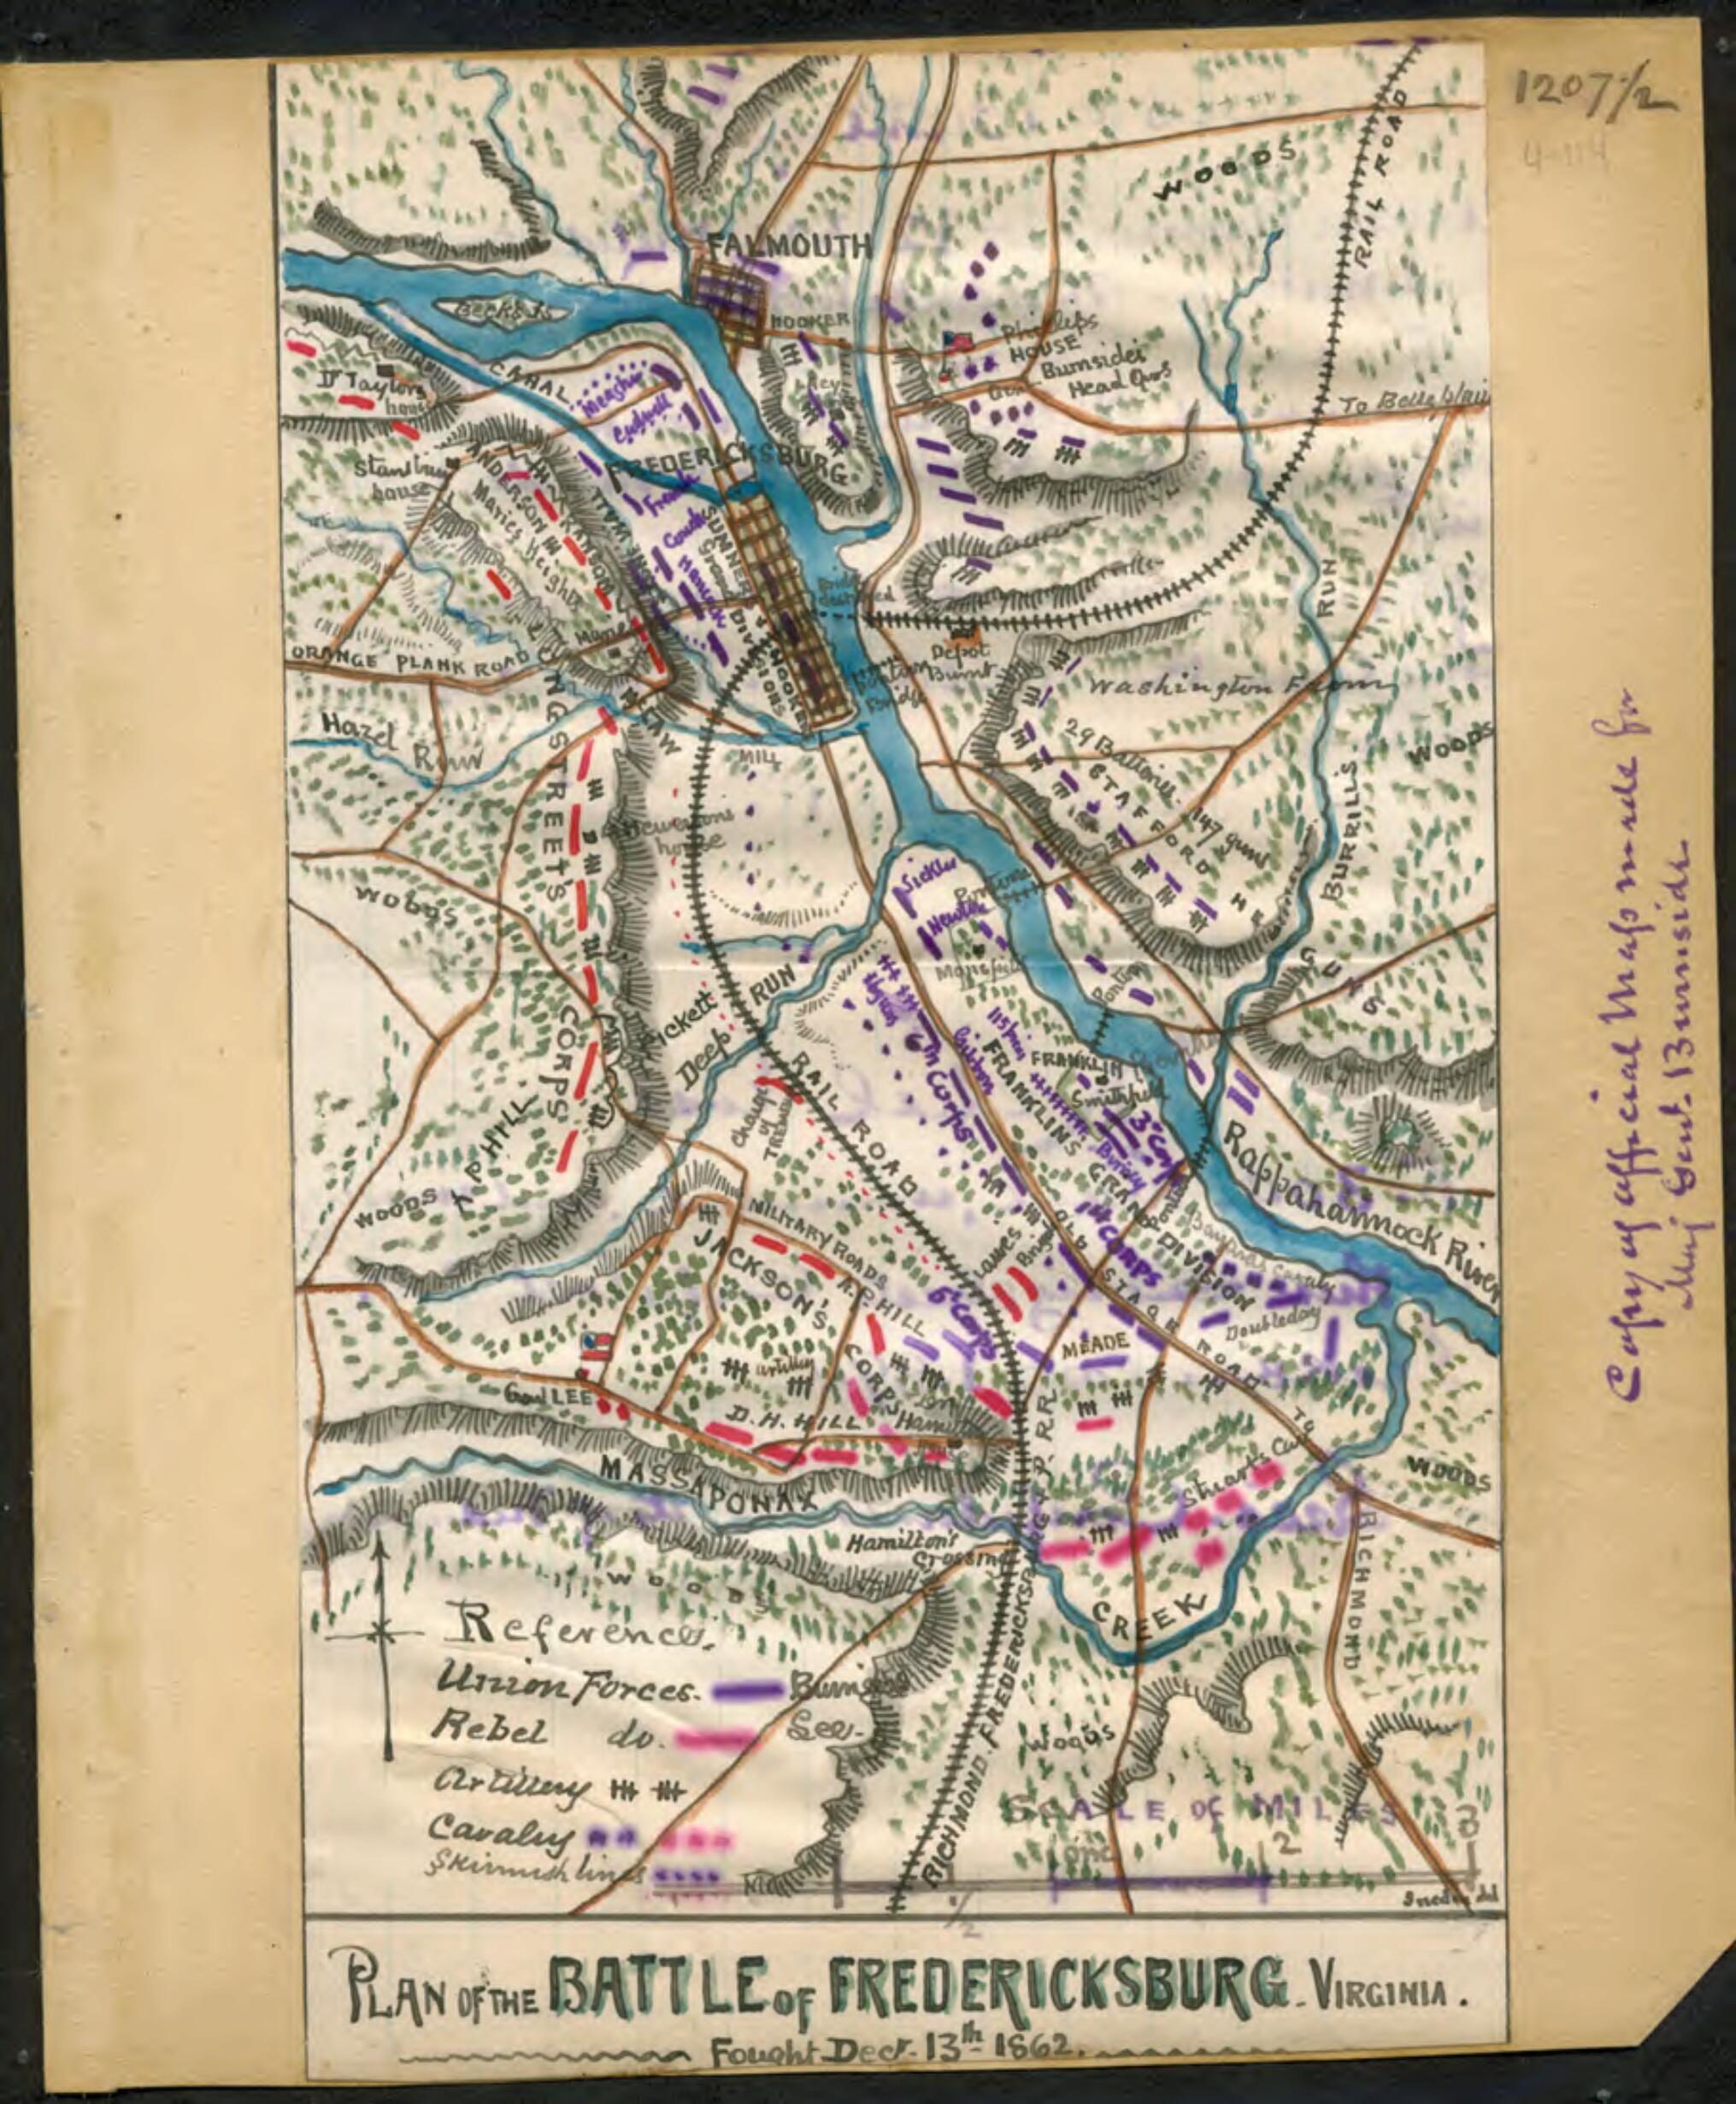 This old map of Plan of the Battle of Fredericksburg, Virginia : Fought Decr. 13th 1862 from 12-13 was created by Robert Knox Sneden in 12-13